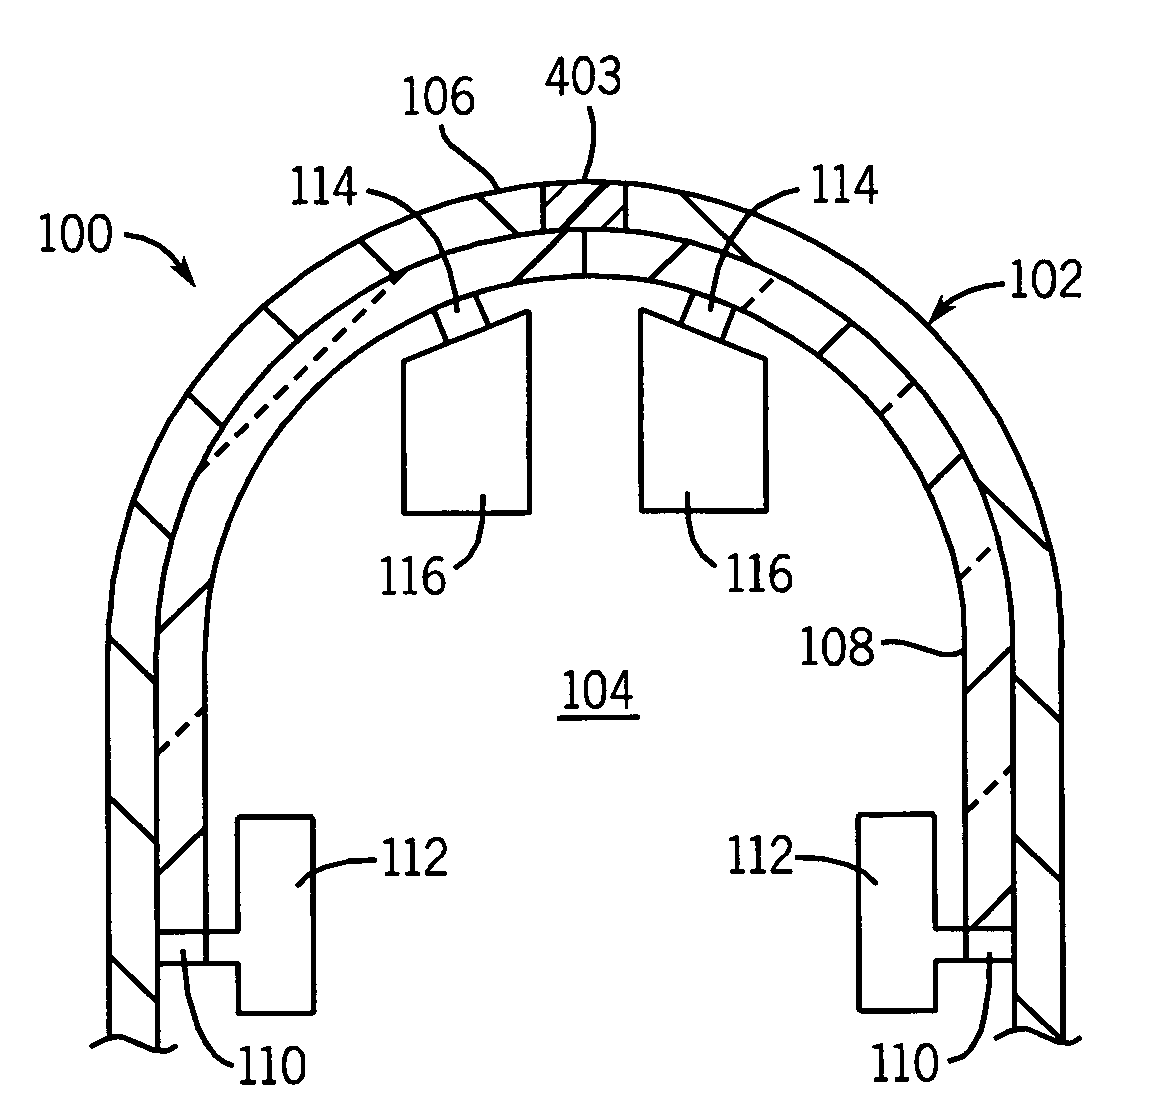 Projectile having a casing and/or interior acting as a communication bus between electronic components